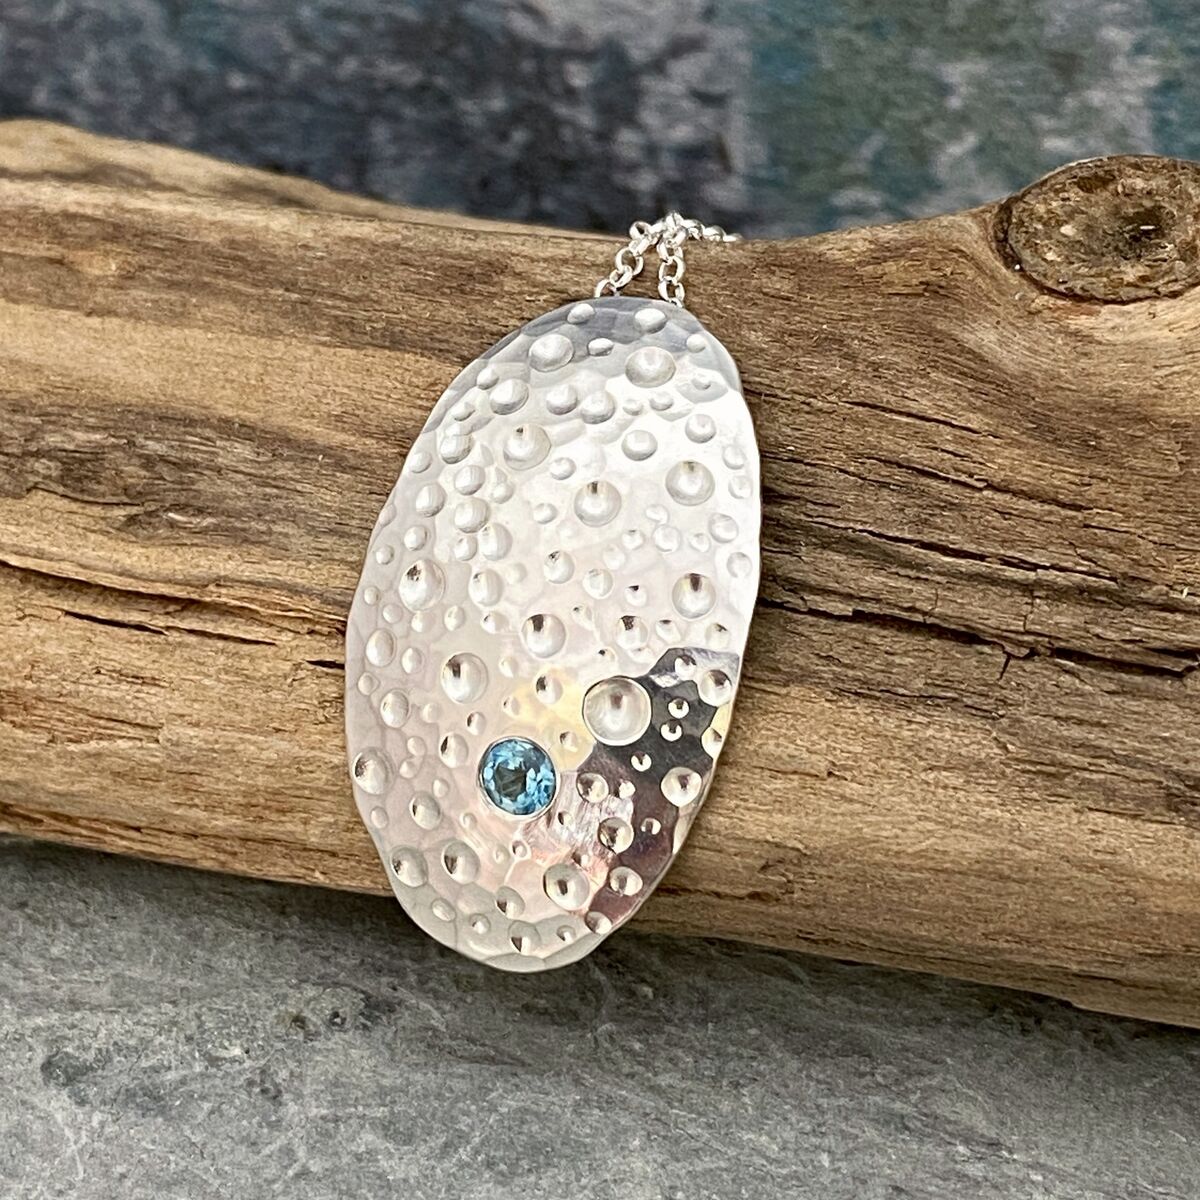 Hammered silver pendant 5